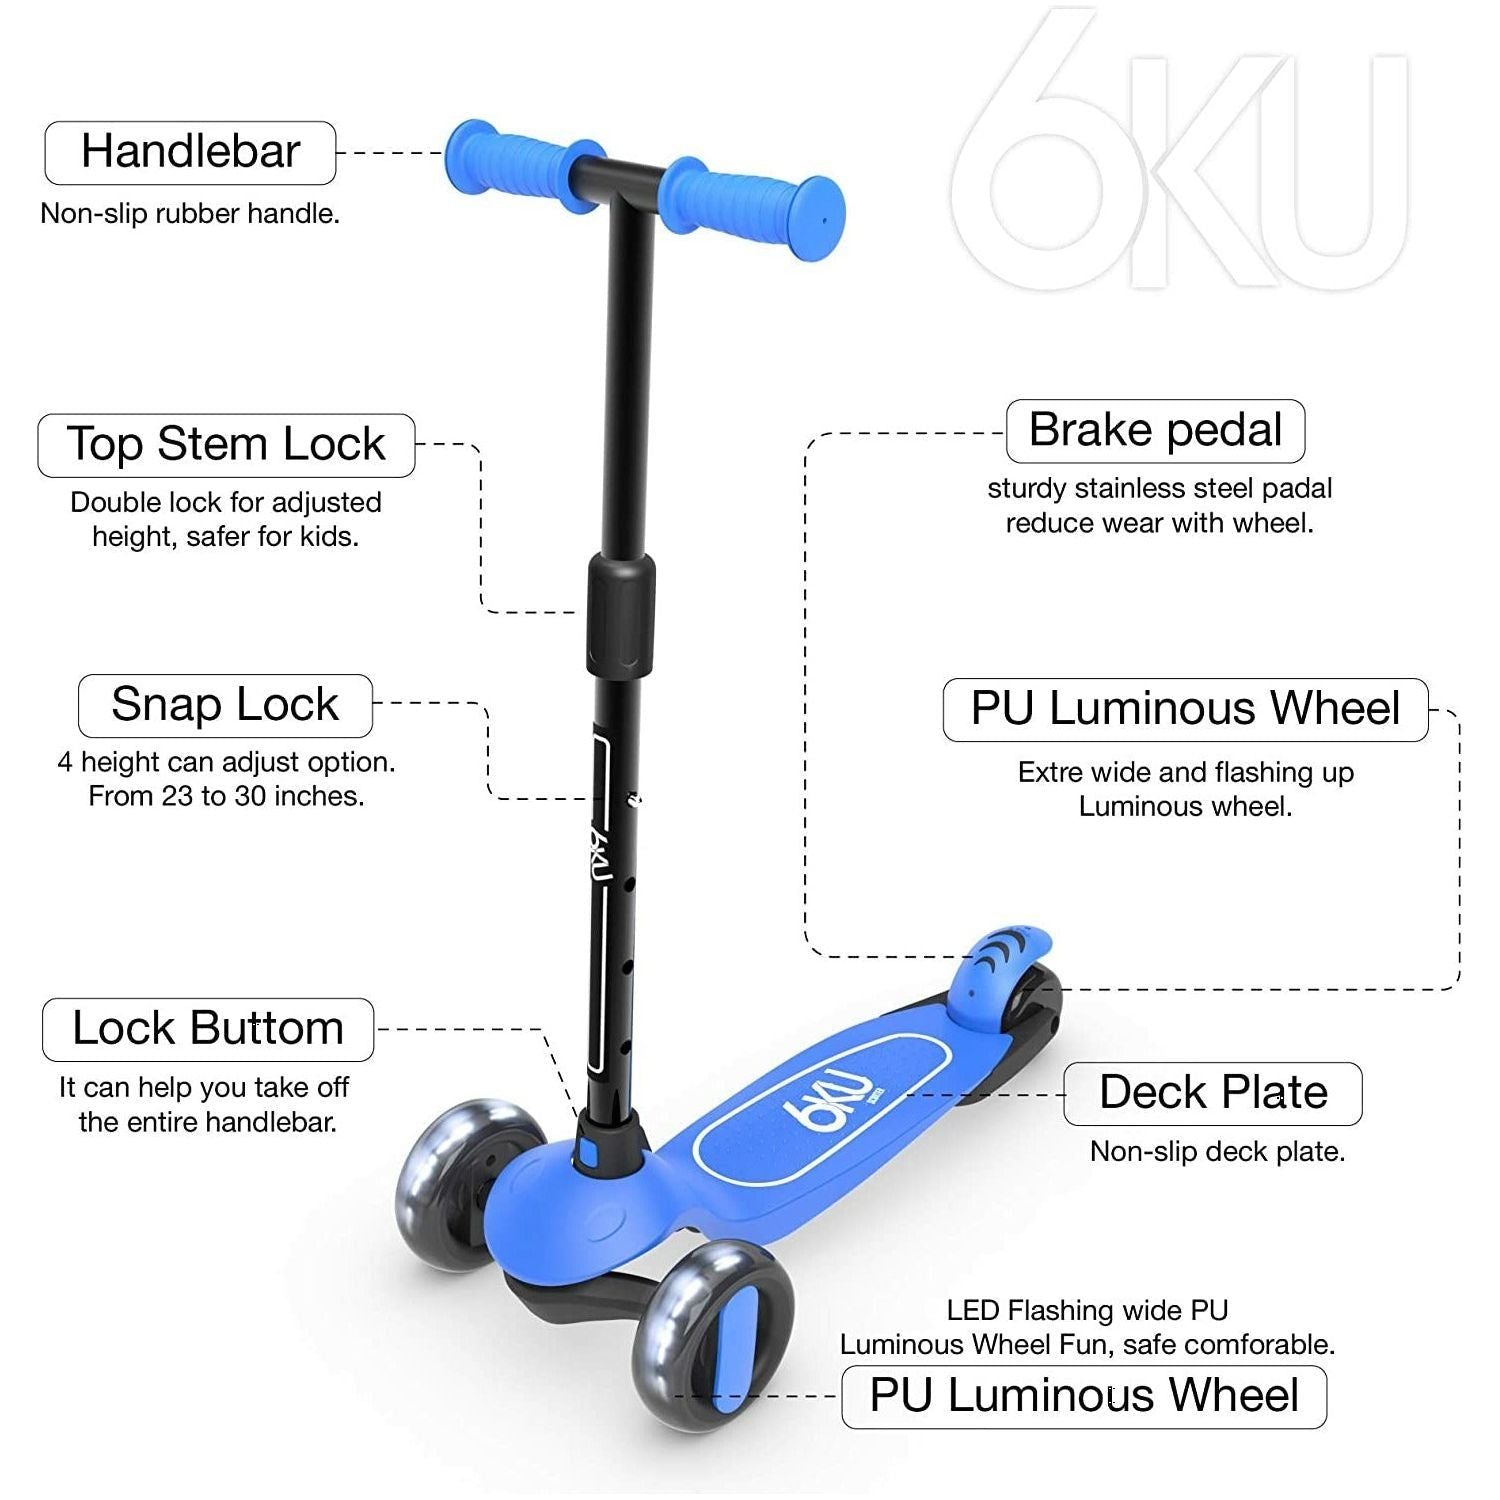 6KU 3 Wheel Flash LED Lights and 4 Adjustable Height Blue Age- 3 Years to 8 Years (Holds upto 50 Kgs)